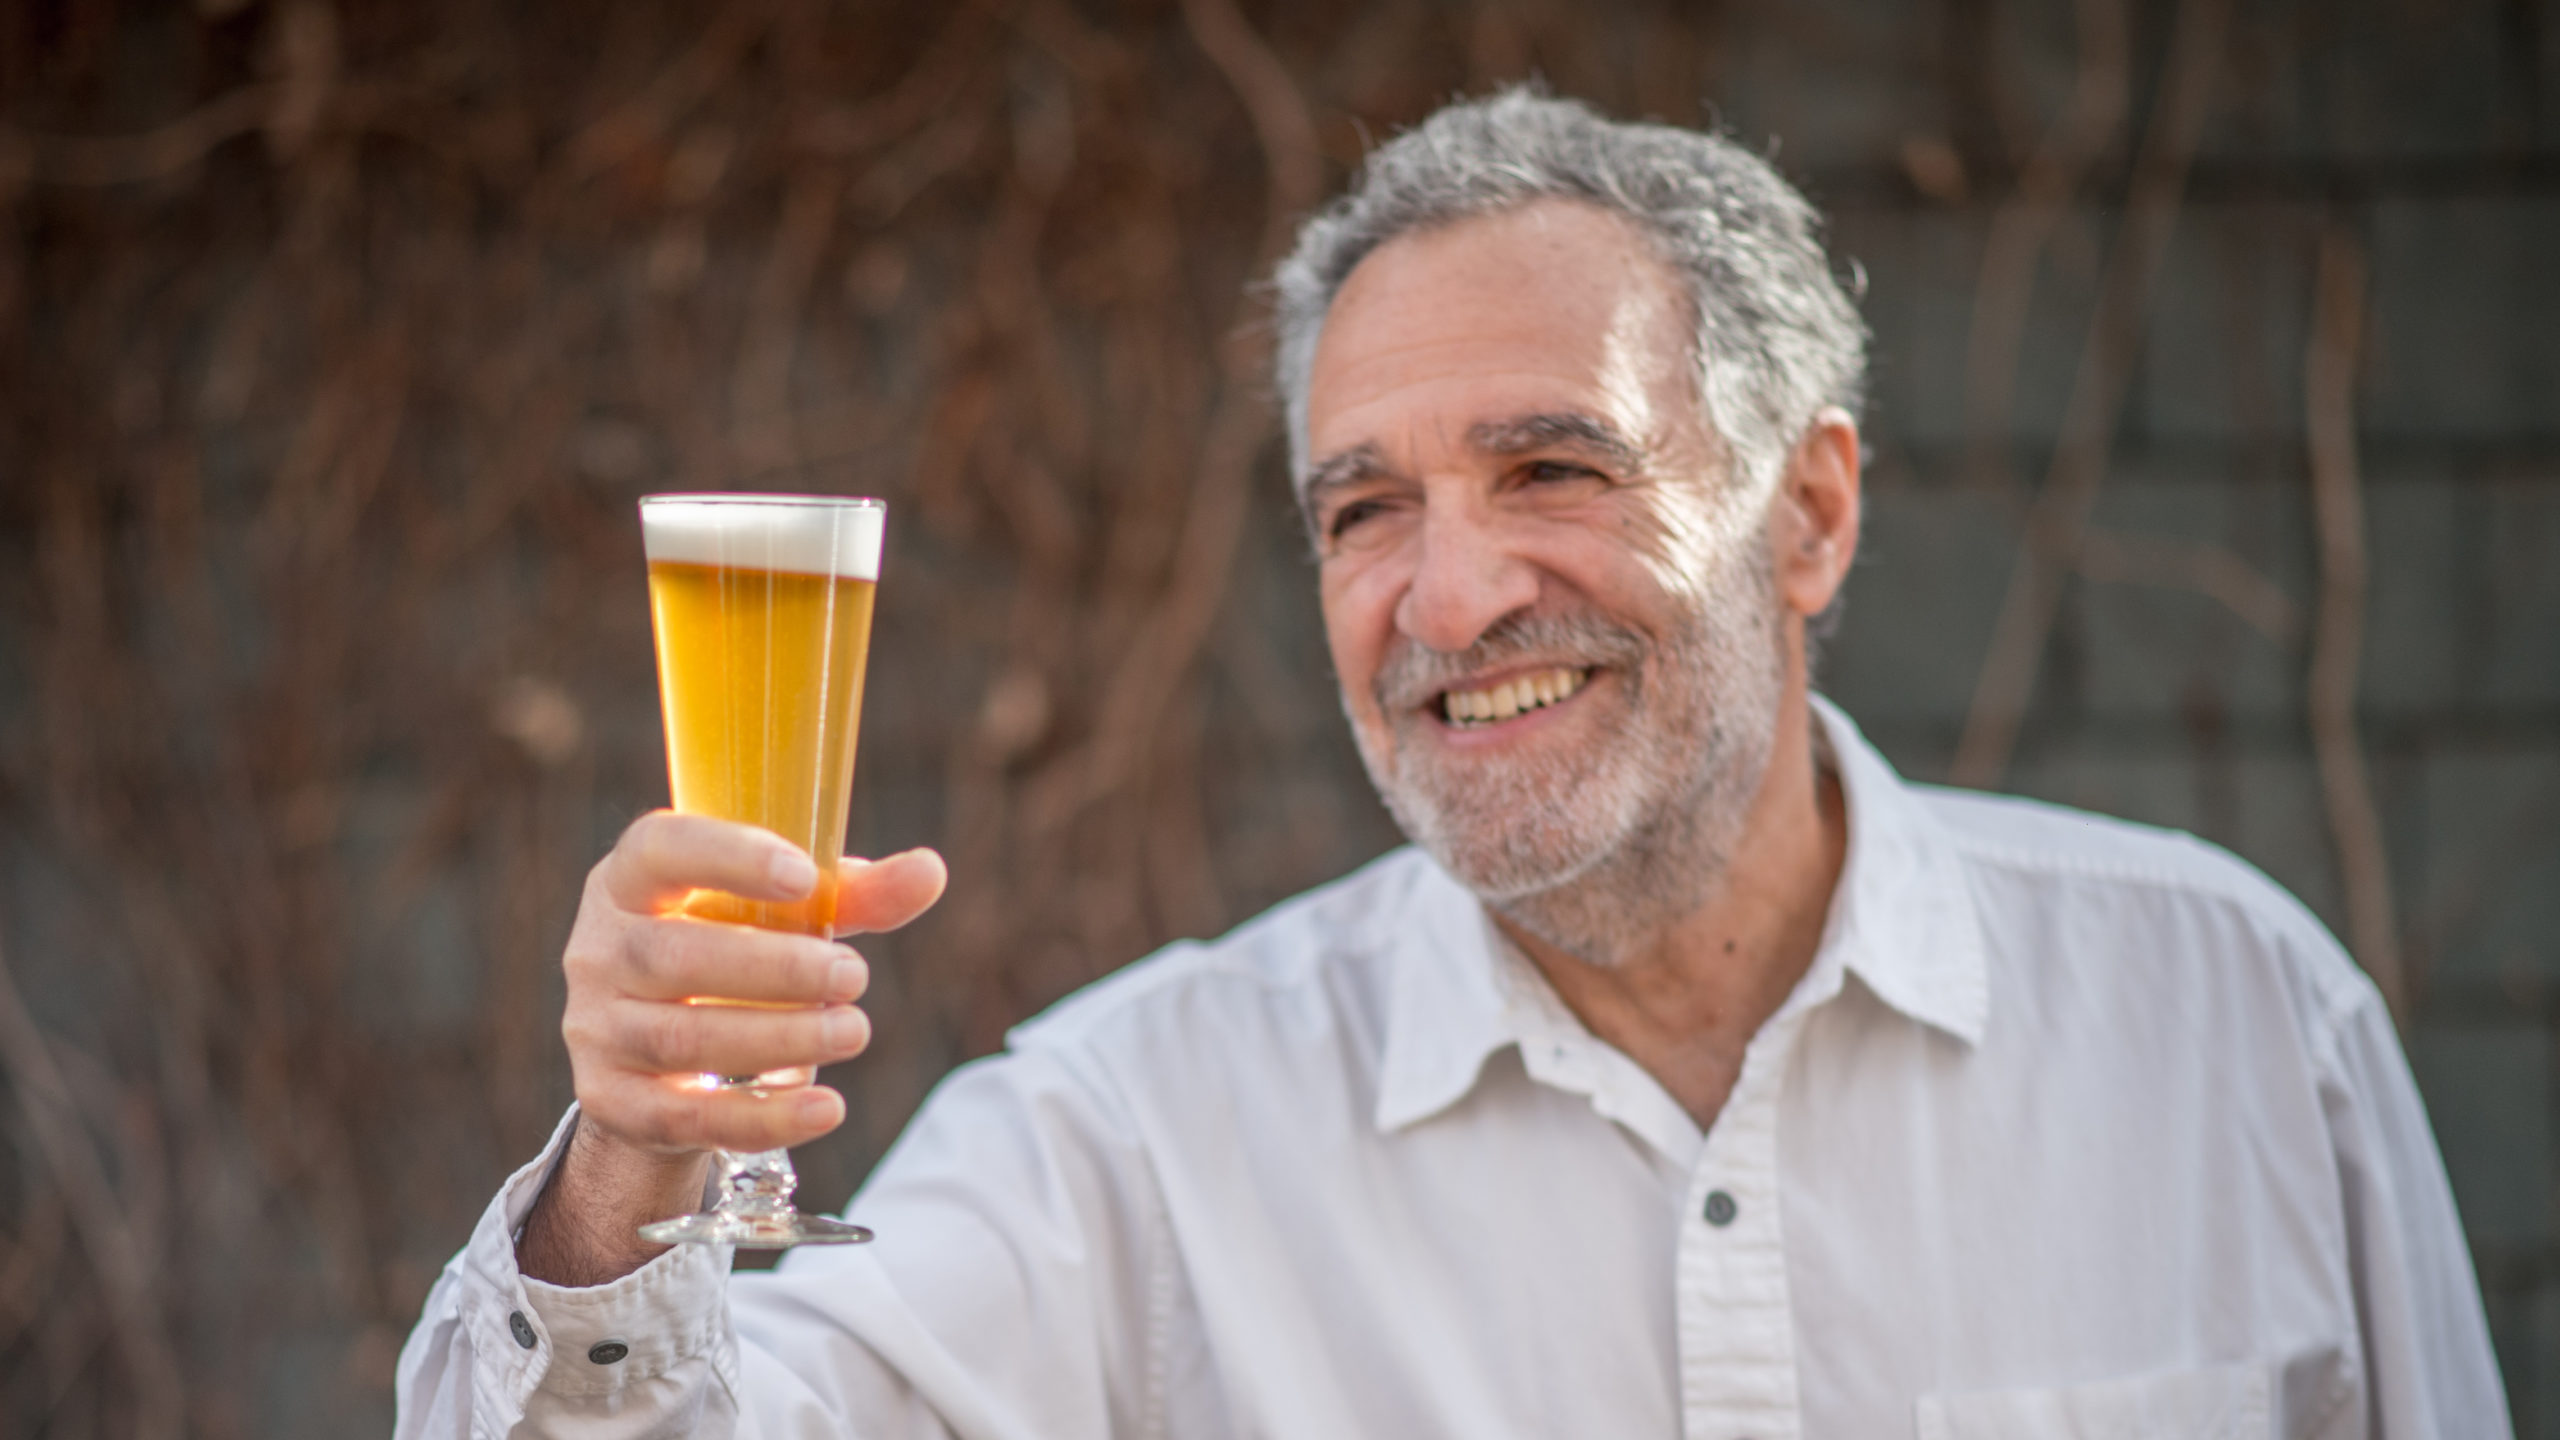 Charlie Papazian holding a beer glass